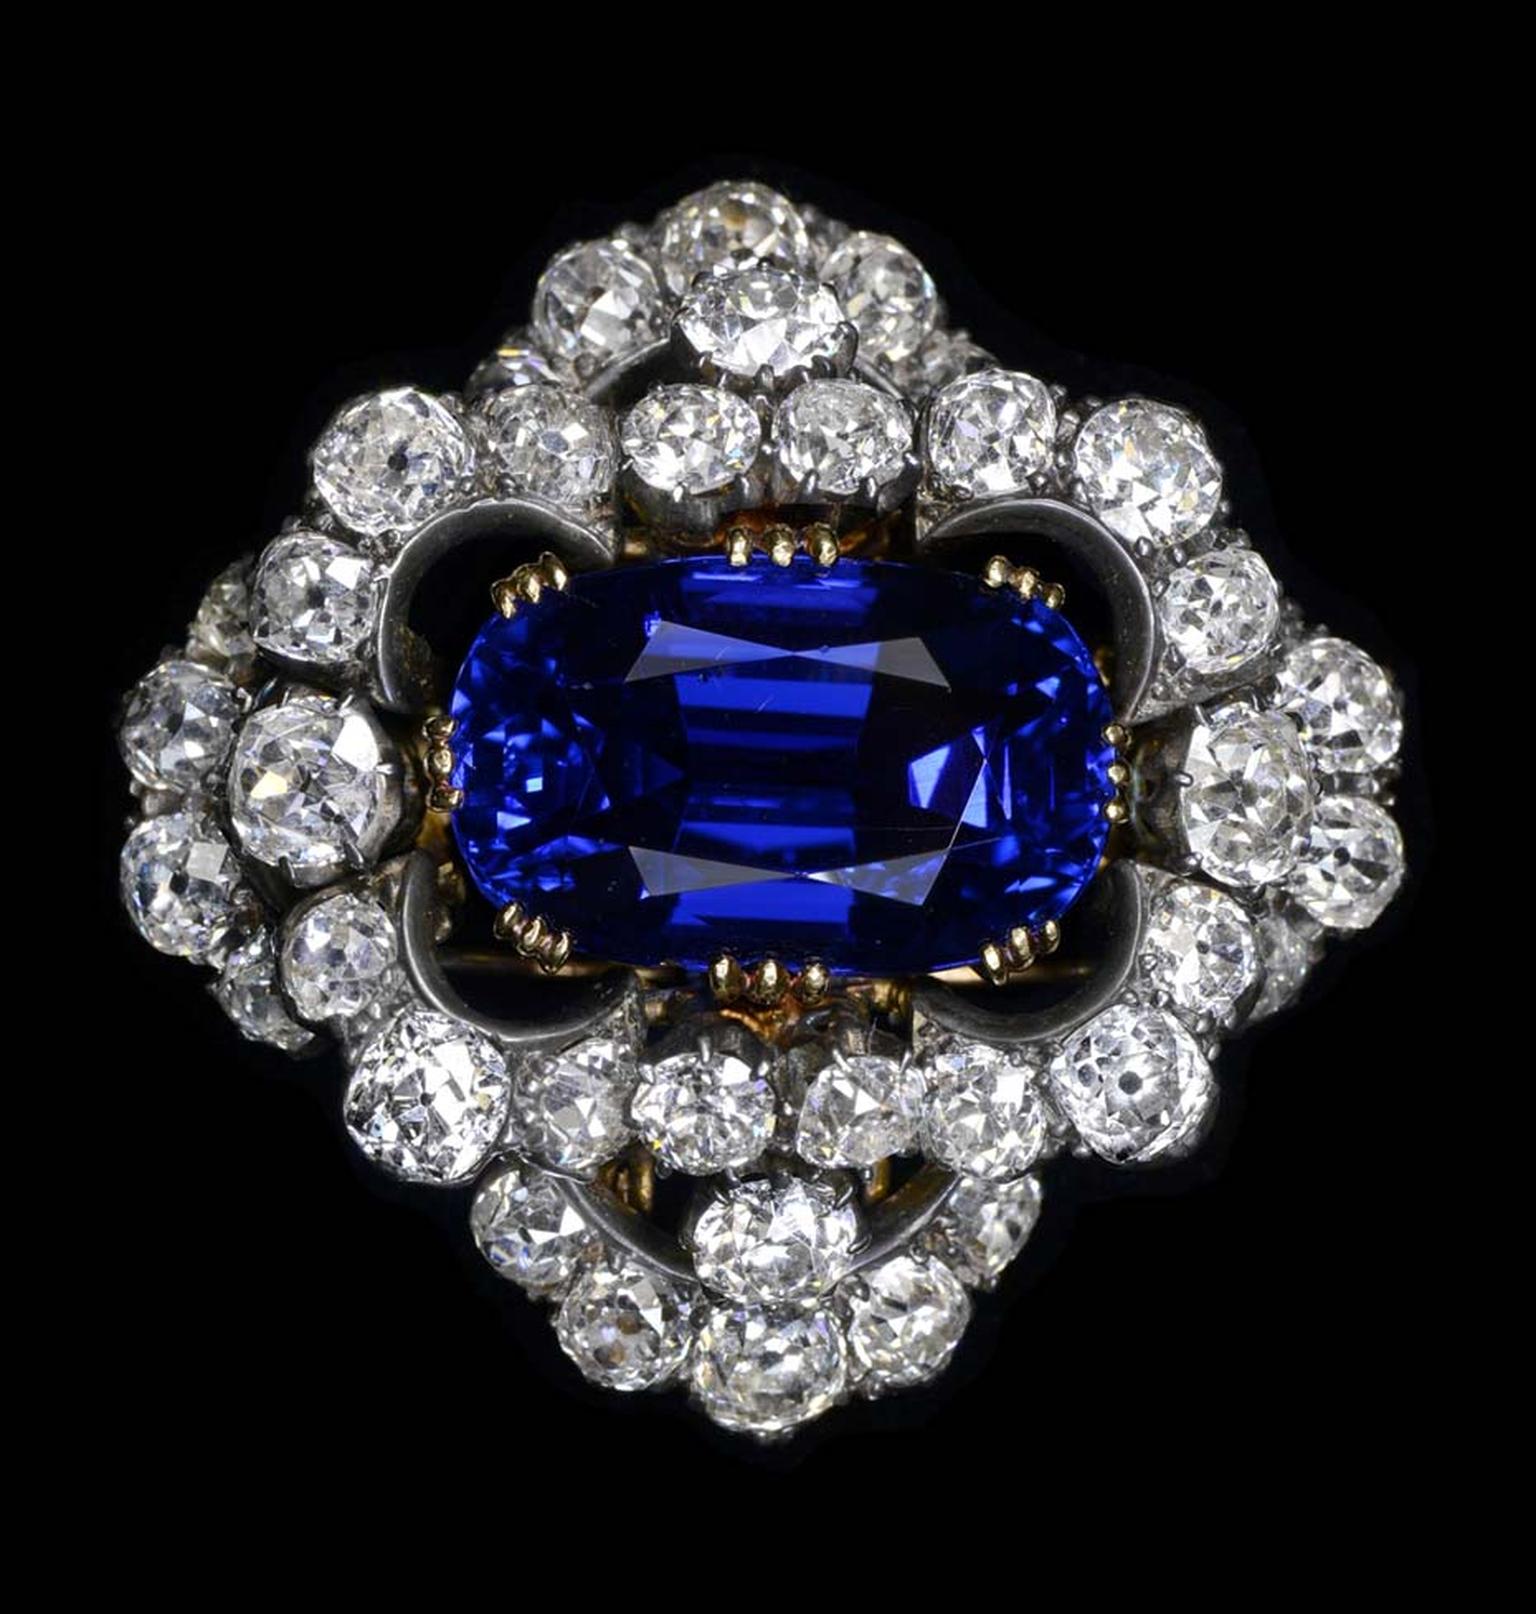 Dehres from Hong Kong is bringing this magnificent non-heated 37.29 carat Burmese sapphire brooch, given to Elizabeth Taylor by her husband Richard Burton, to Fine Art Asia 2014.